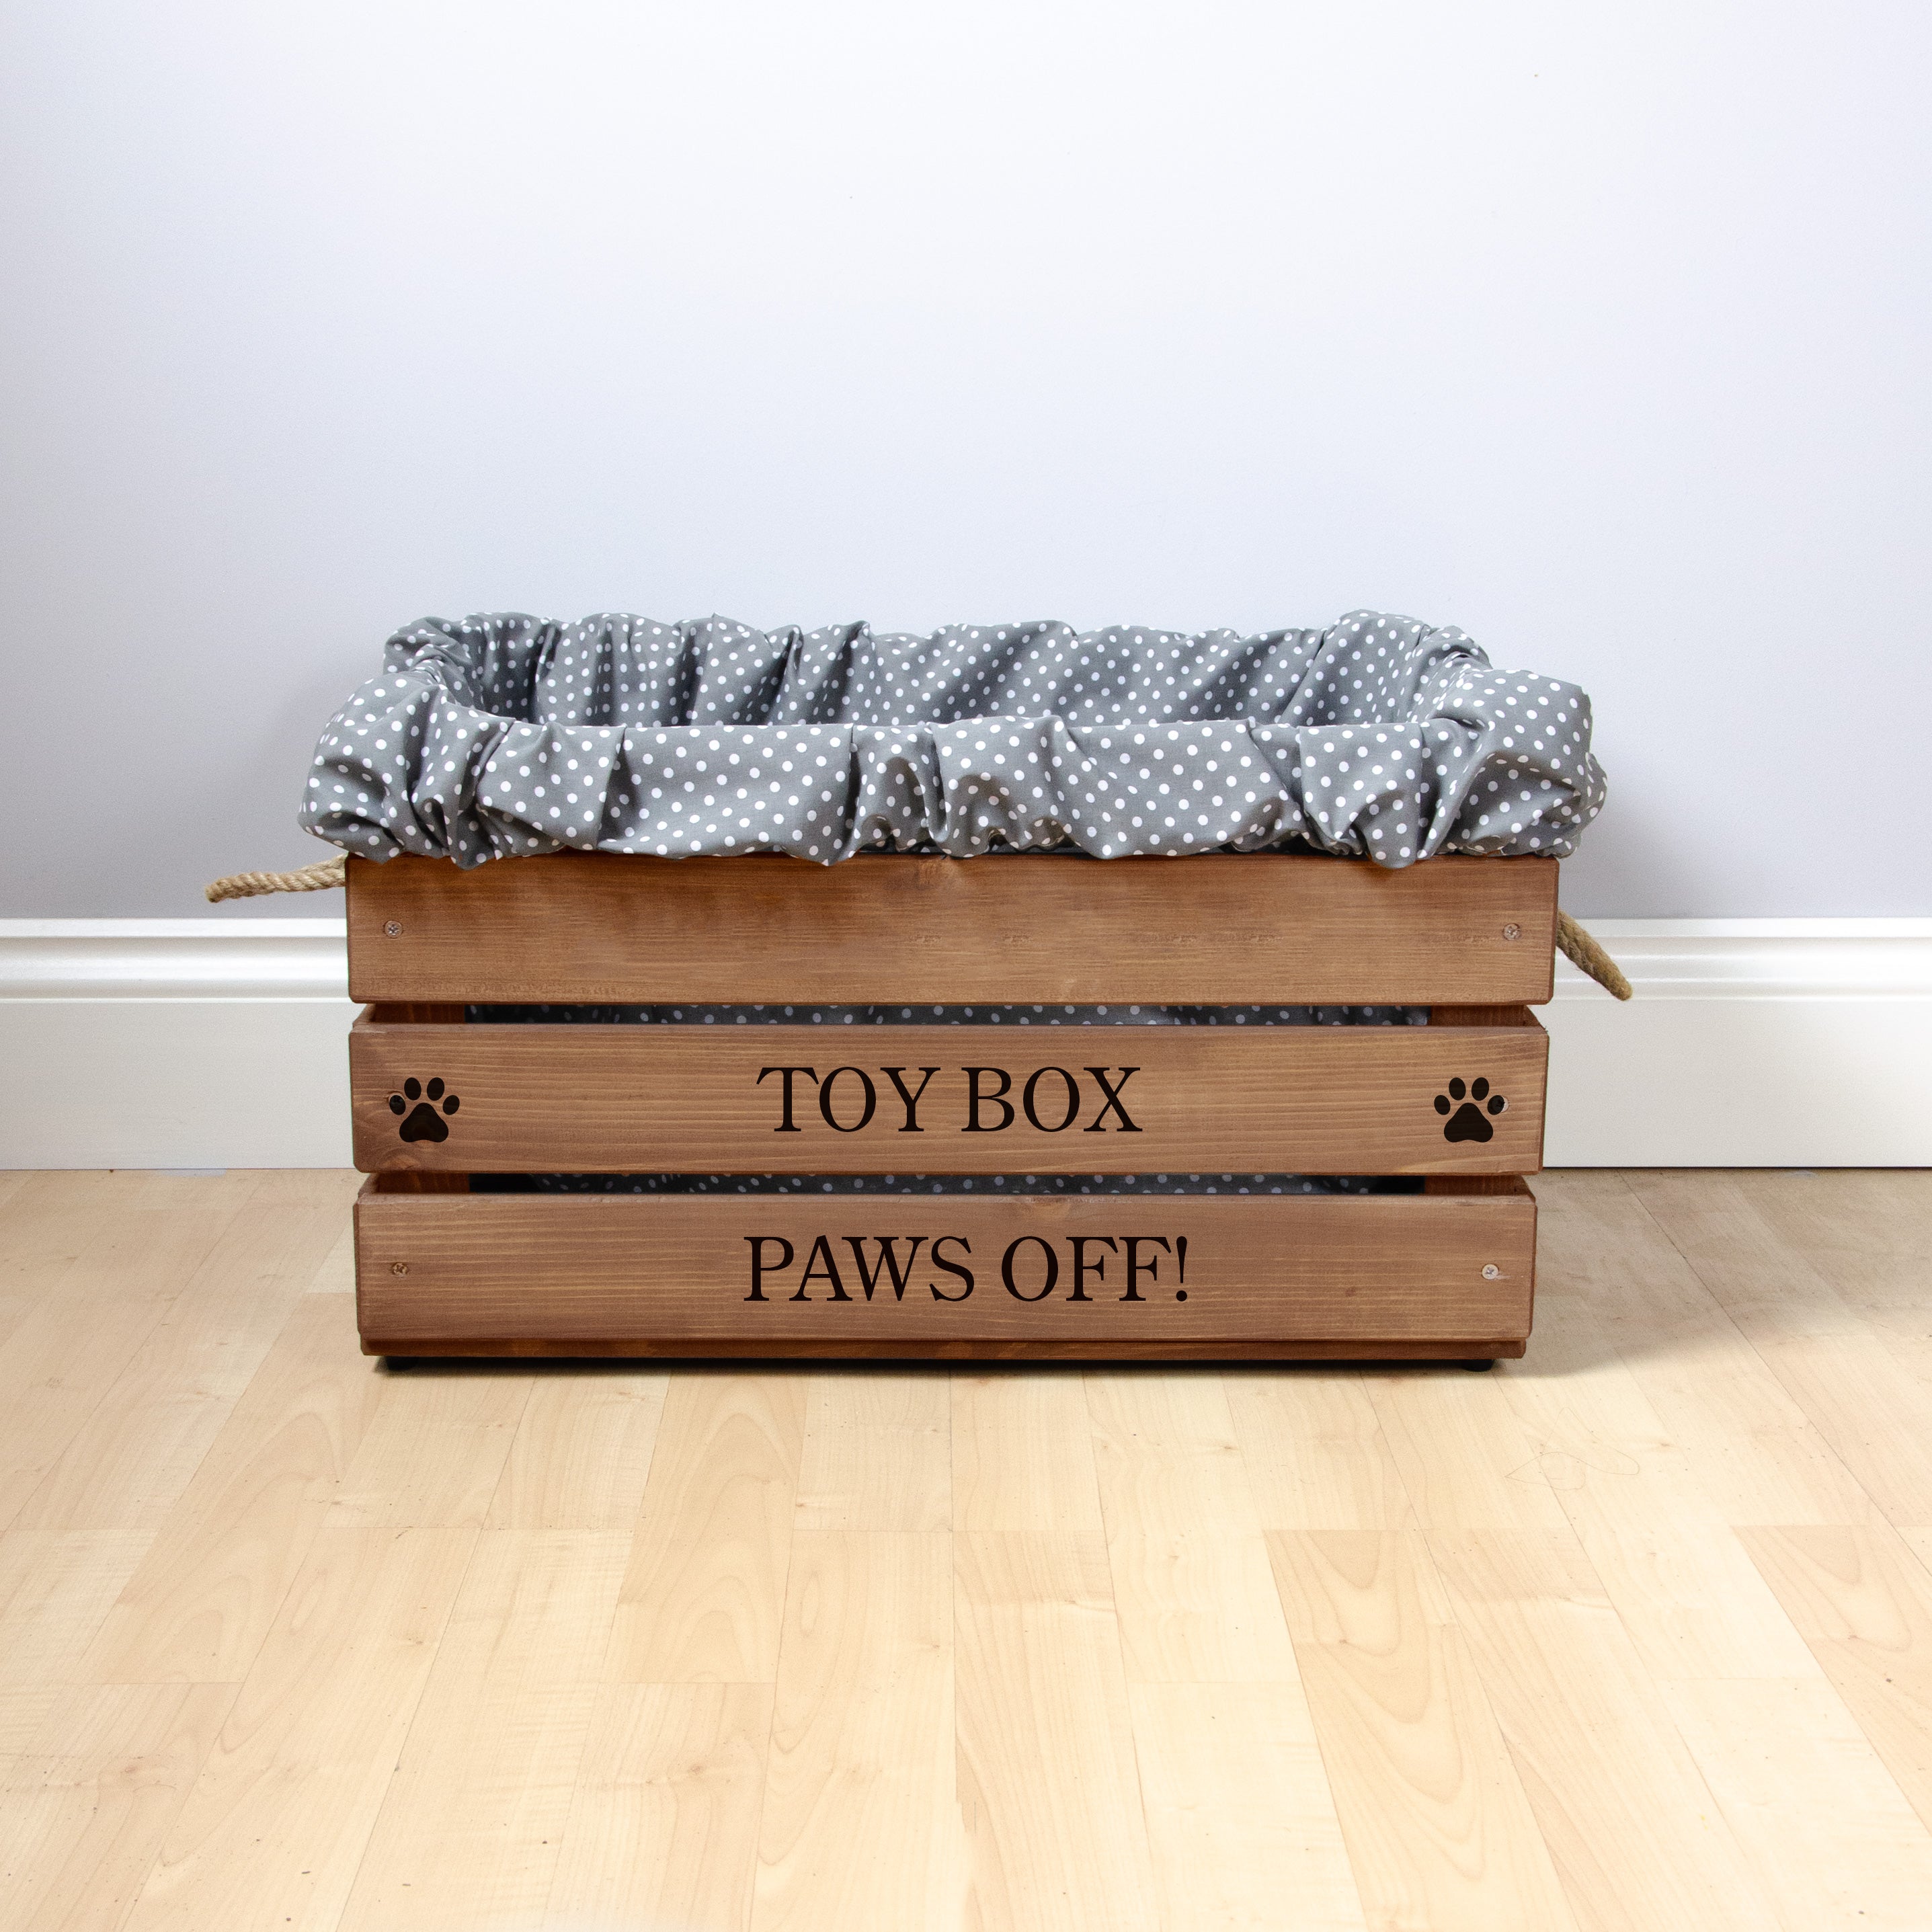 Large Personalised Dog Toy Box with Removable Liner - Oak, Dog Toys, Personalised Dog Toys, Dog Toy Box, Large dog pet toy box, Oak Toy Box for large dogs